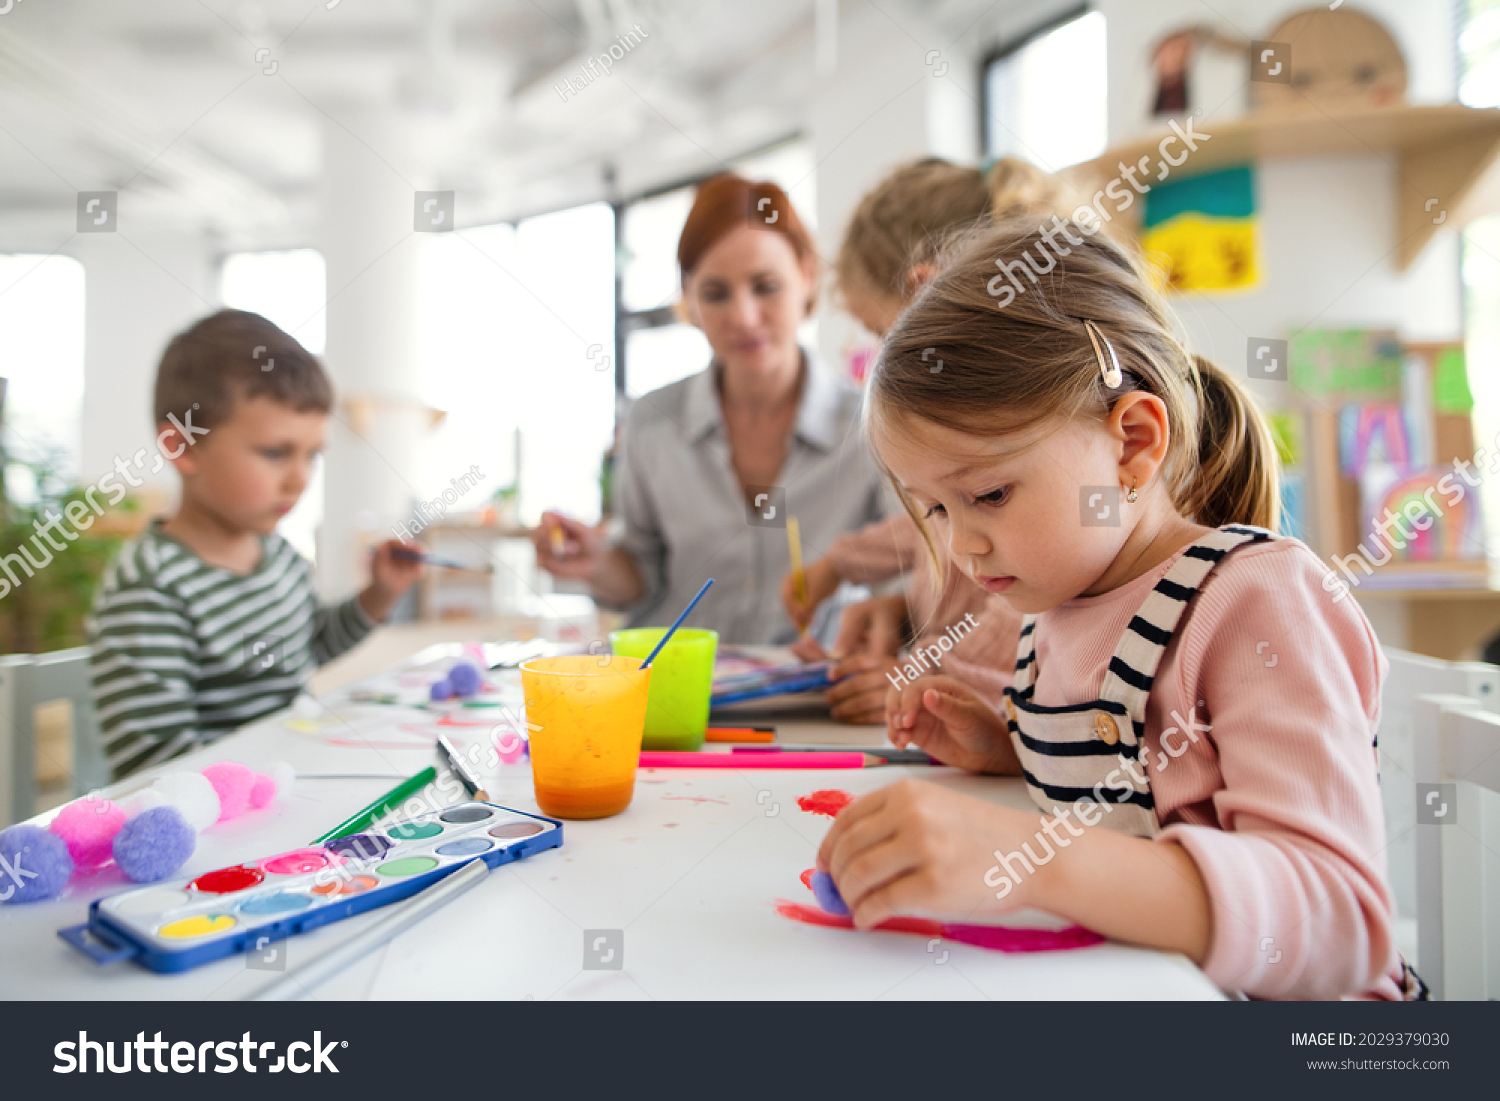 Group of small nursery school children with teacher indoors in classroom, painting. #2029379030